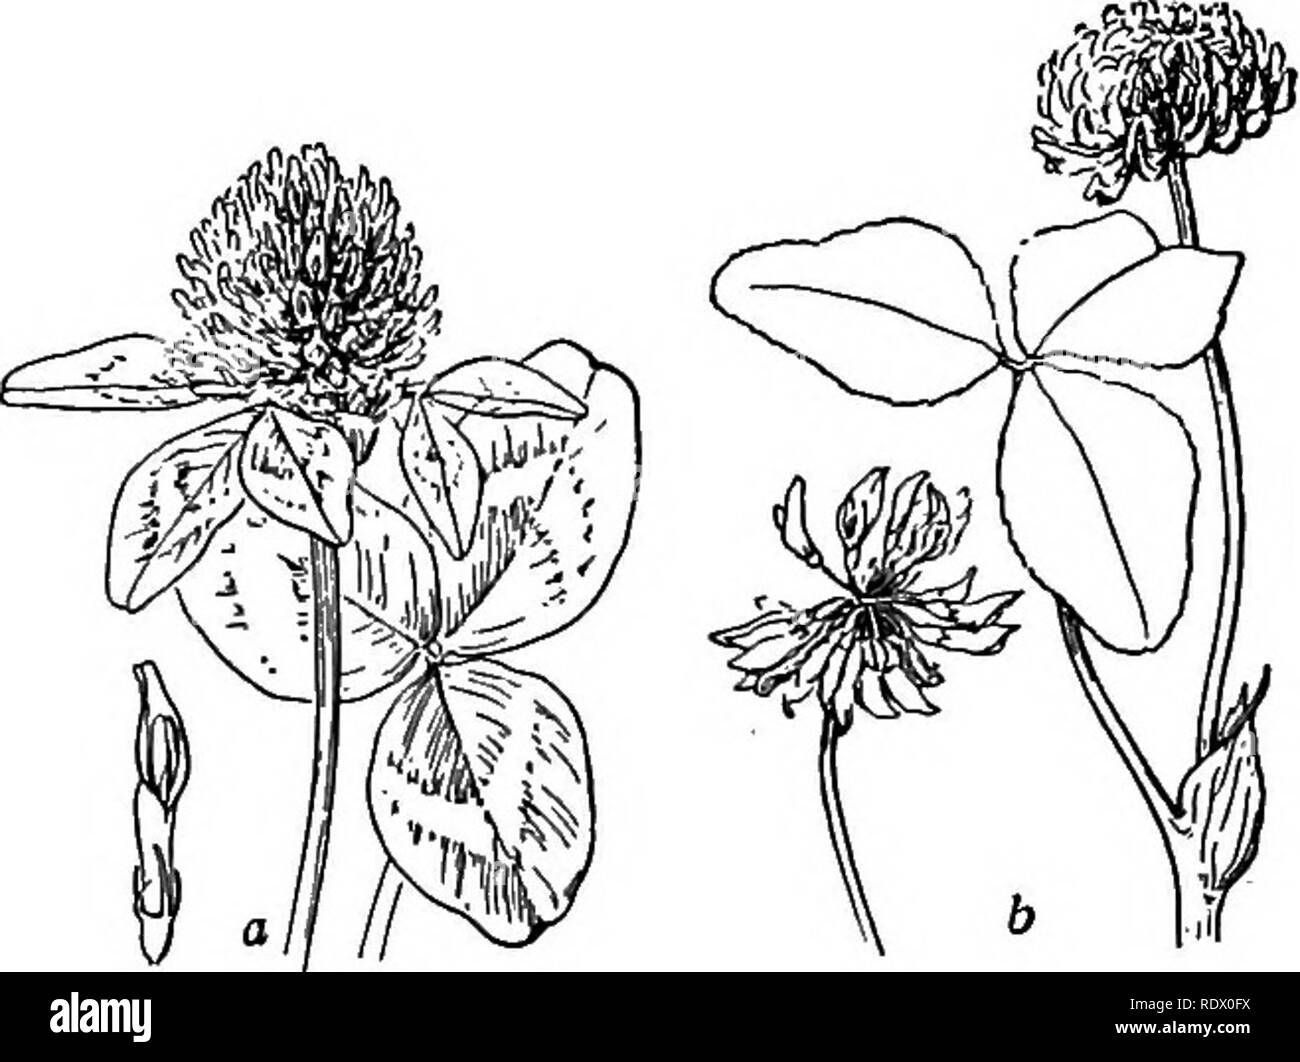 . A spring flora for high schools. Botany. LEGUMINOSEAE (PULSE FAMILY) 83 leaflets 7 to 11, oblanceolate; flowers in a long raceme, purplish-blue; pods broad, very hairy with 5 or 6 seeds. Sandy soil. May, June.. TrifoUum; a. T. pratense, Red clover; 6, T. rcpens. White clover. TRIFOLIUM Tufted shrubs with mostly palmately, 3-foliolate leaves. Flow- ers in heads or spikes. Keel short and obtuse and the loth stamen more or less sep- arate from the others. Pods small, often included in calyx. T. pratense, Red Clover. Stems ascending, some- what hairy; leaflets oval or obovate, often notched at e Stock Photo